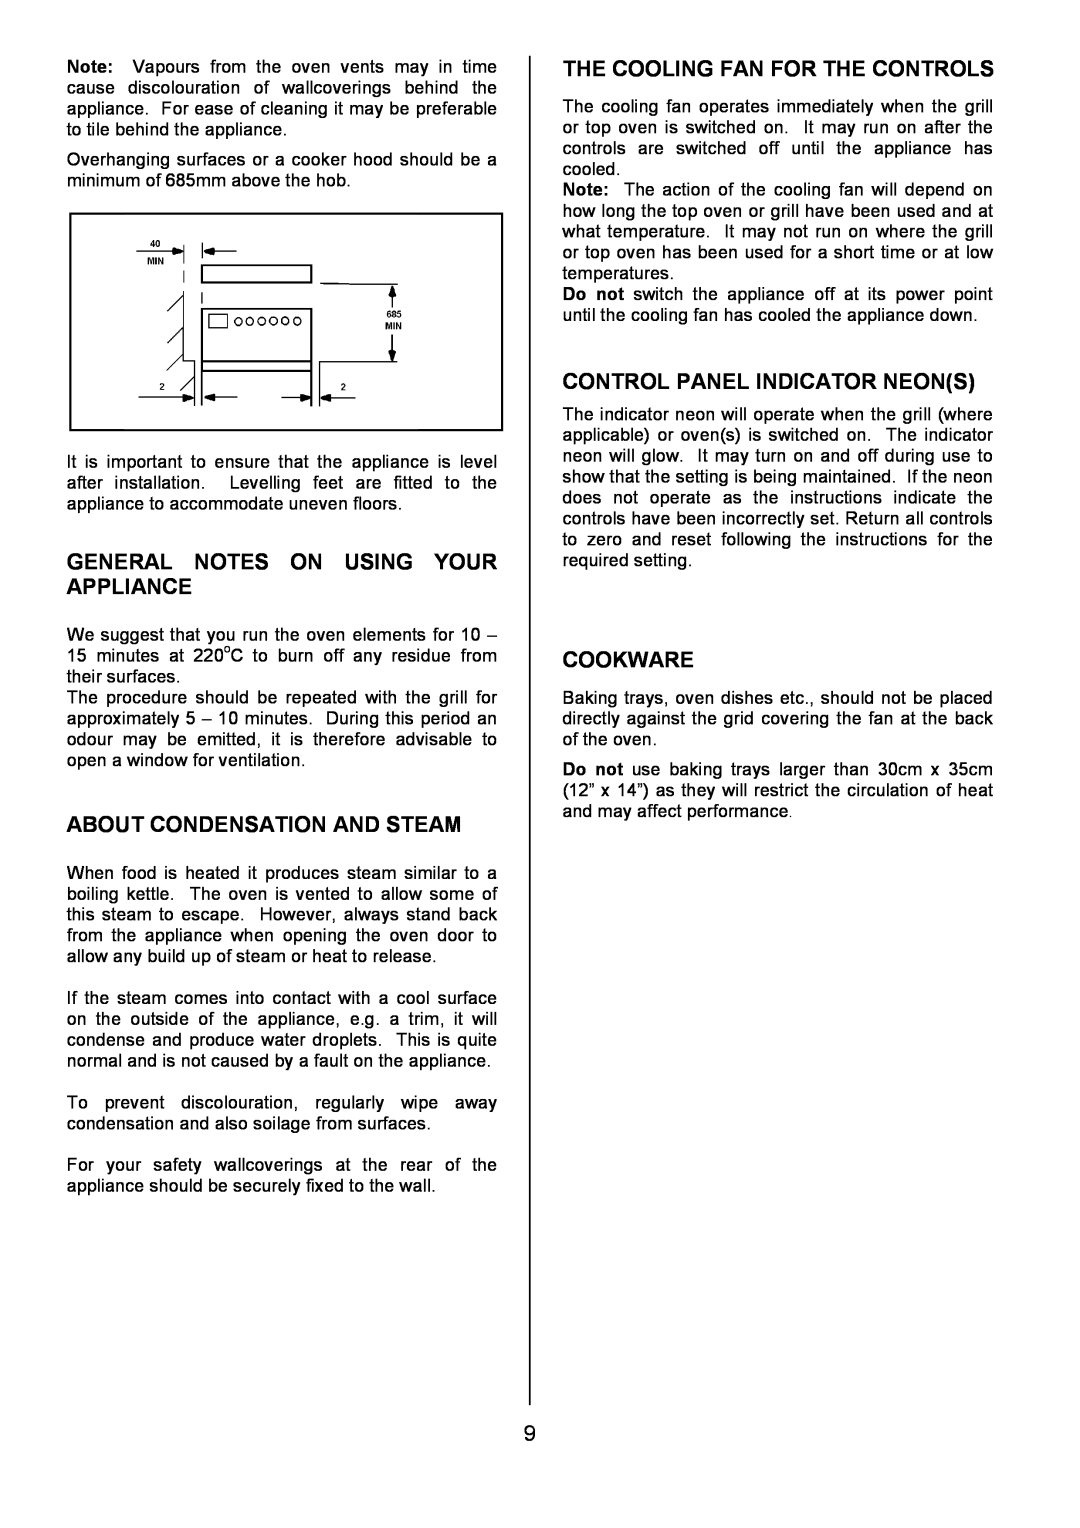 Tricity Bendix CSE500 General Notes On Using Your Appliance, About Condensation And Steam, Control Panel Indicator Neons 